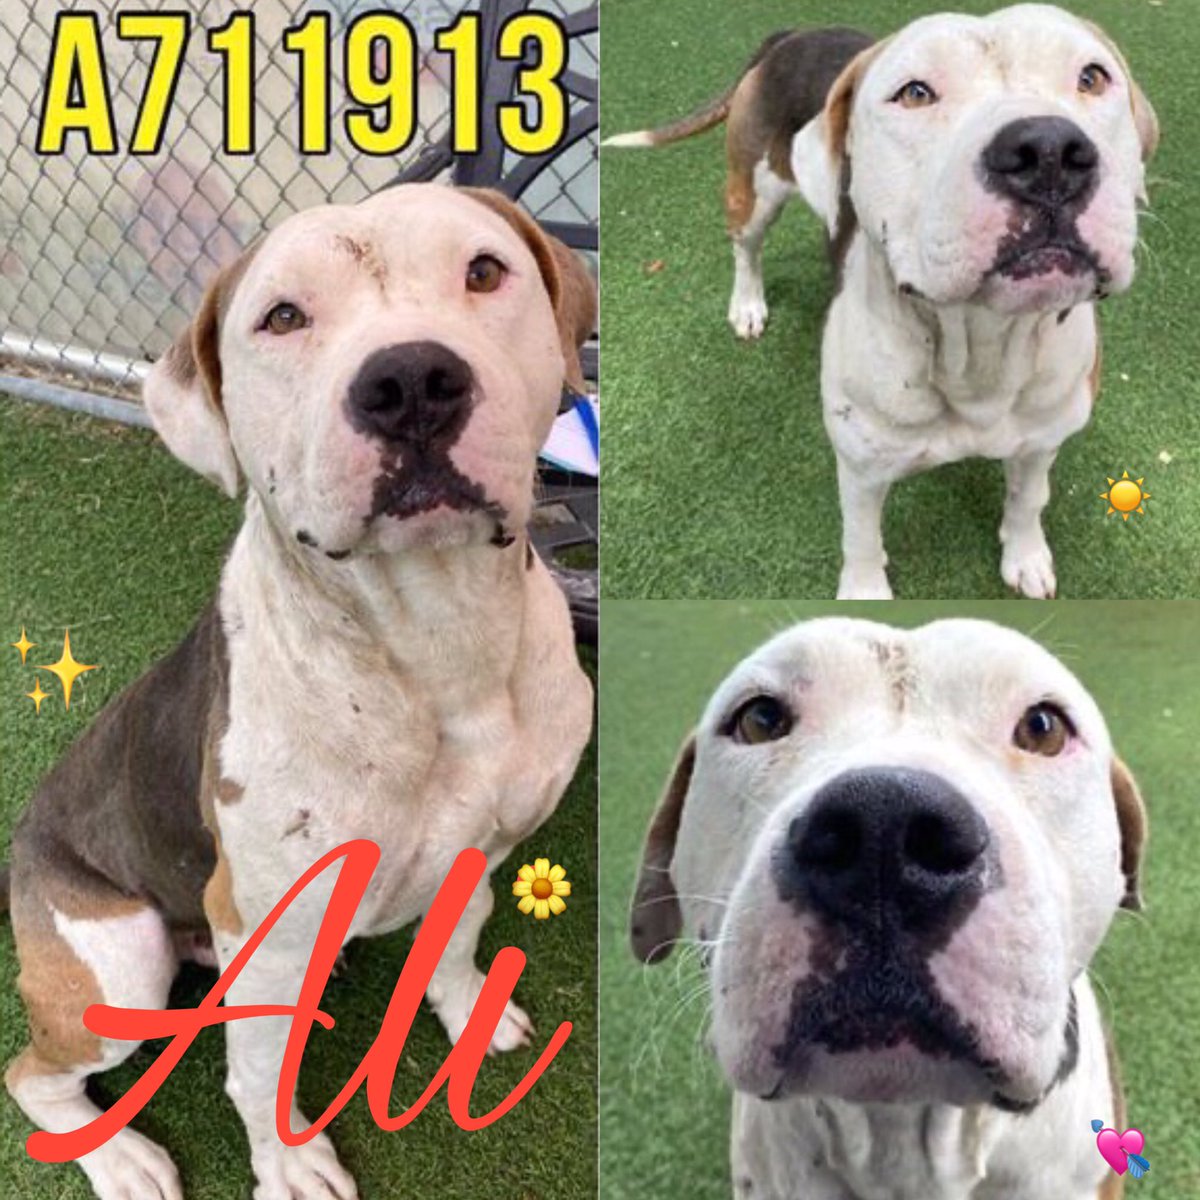 🆘 INJURED SWEET PITBULL DOG ALI #A711913 (3yo M, 69lb, hw-) WITH MANY SCARS IS TBK☠️TODAY 5.7 BY SA ACS #TEXAS‼️ 🚨wounds, oral bleeding 💕Dog friendly, polite, very treat motivated & gentle; walks well on leash; loves soft pets, affection, & leans in for + #DontBullyMyBreed